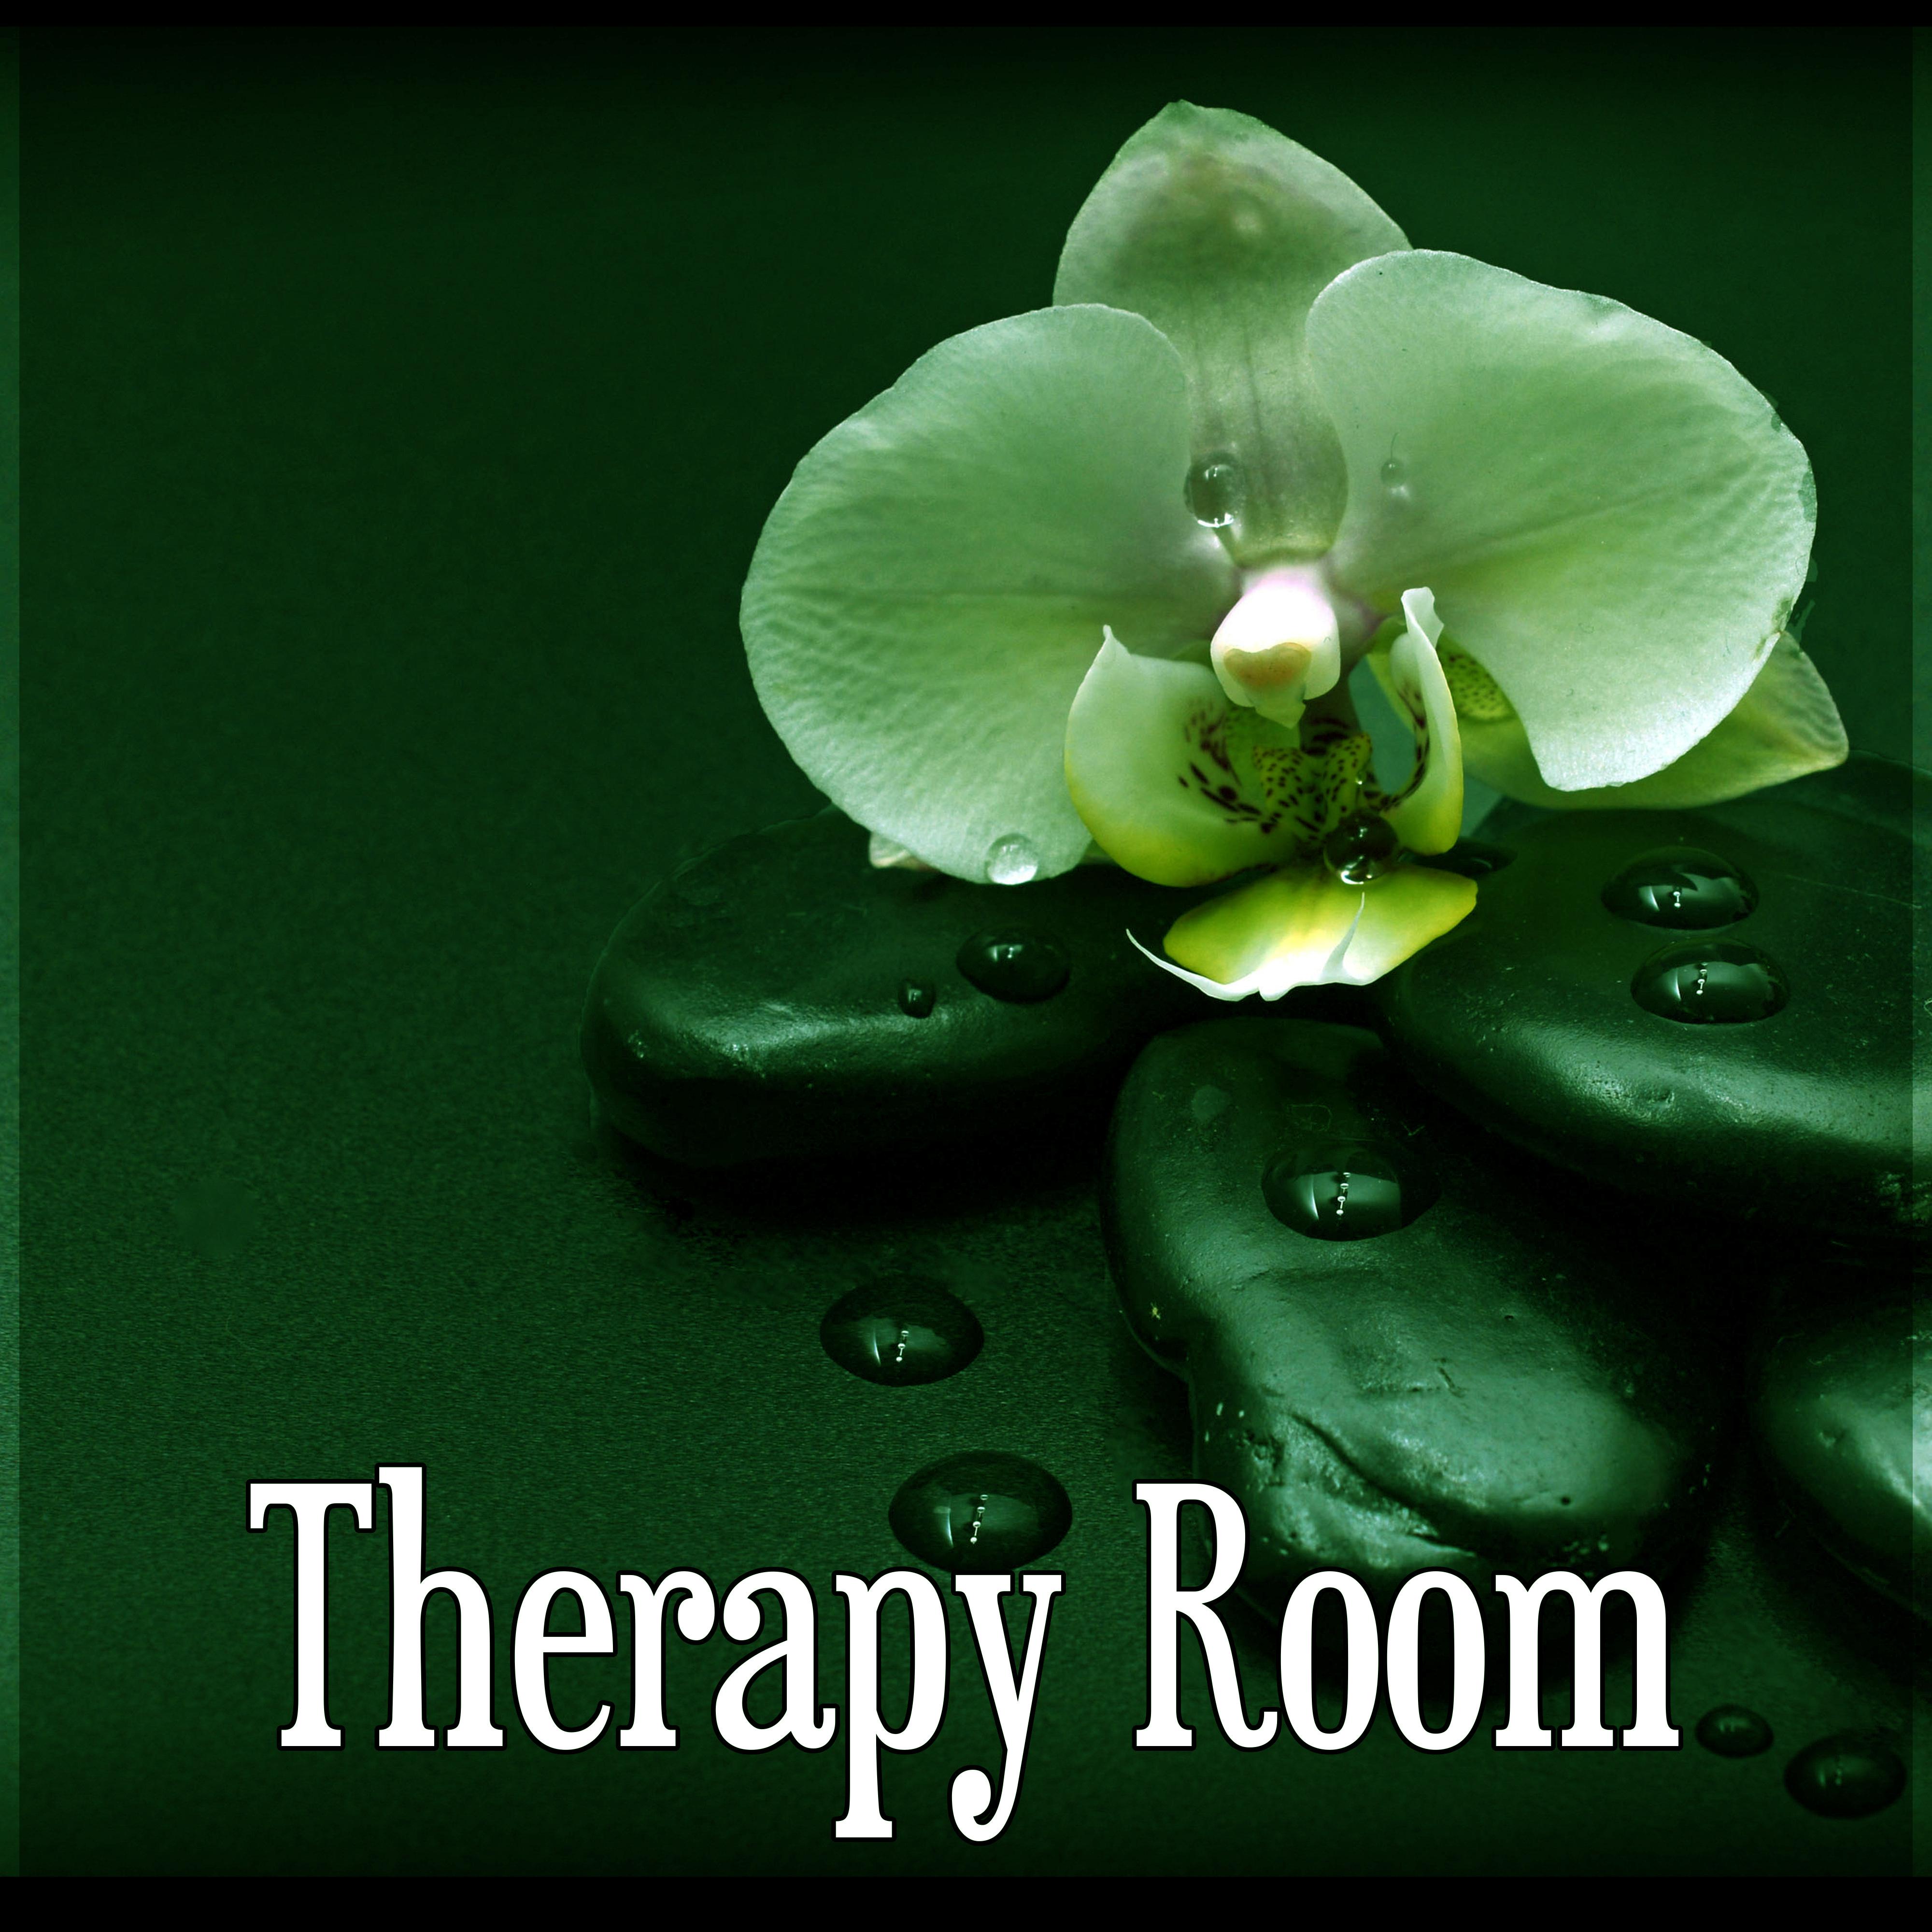 Therapy Room – Sensual Moments In Spa, Massage Therapy, Music for Healing Through Sound and Touch, Serenity Relaxing Spa